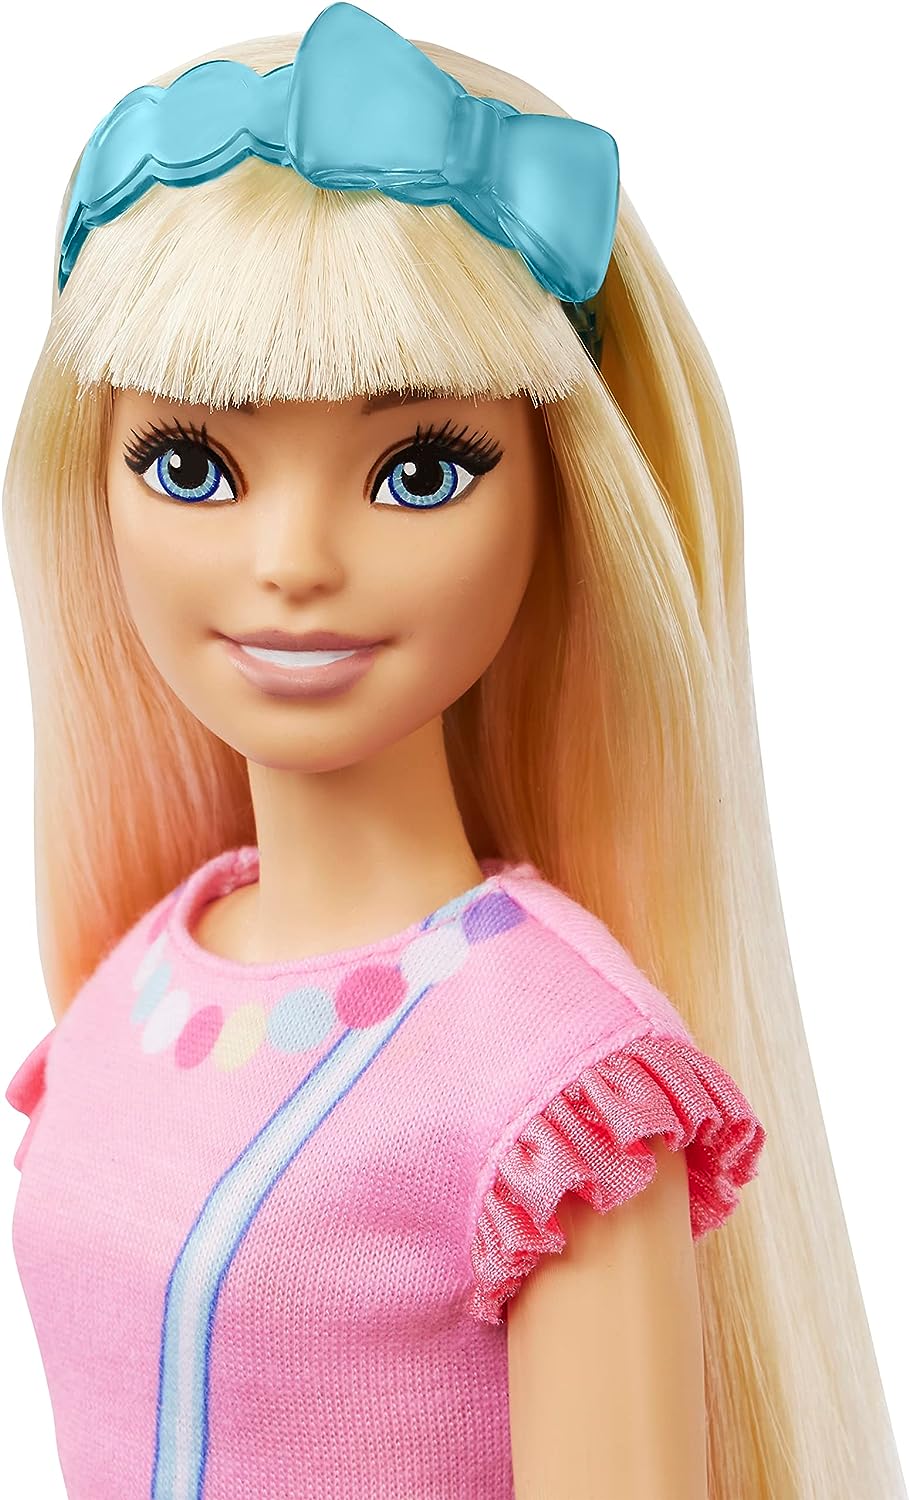 Explore Cherished Memories My First Barbie Review for Heartwarming Play